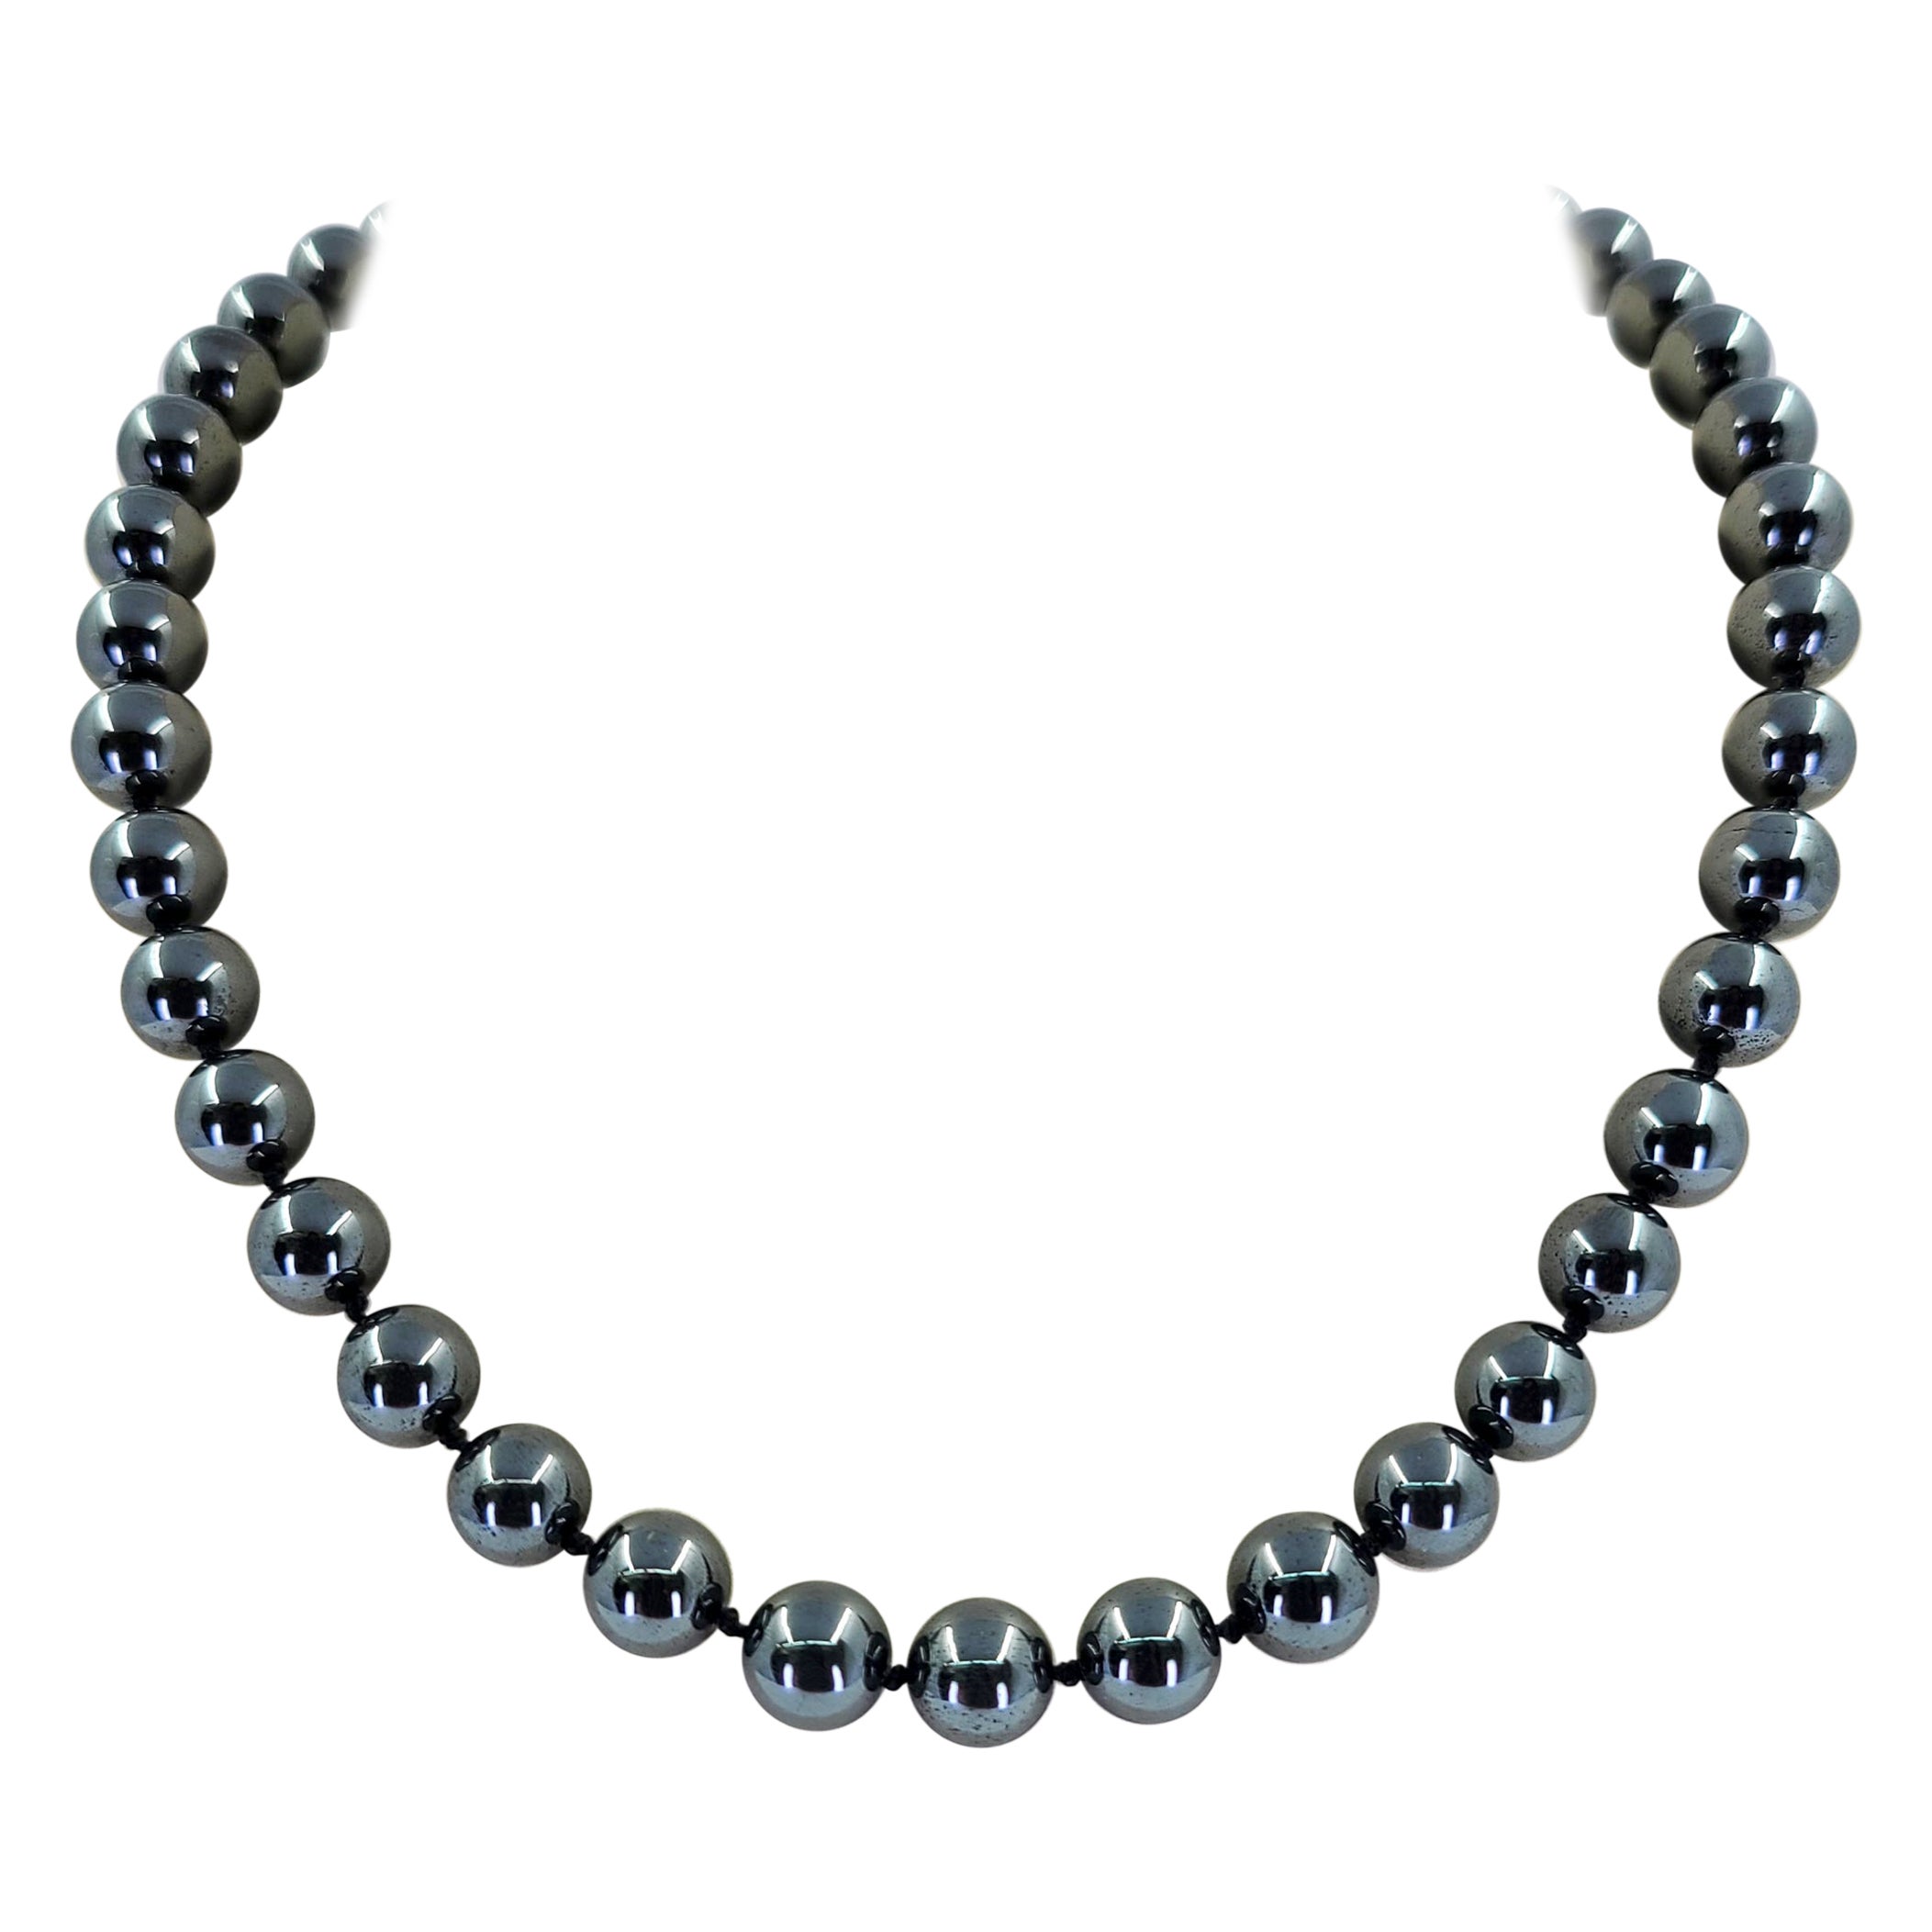 Sterling Silver and Hematite Bead Necklace